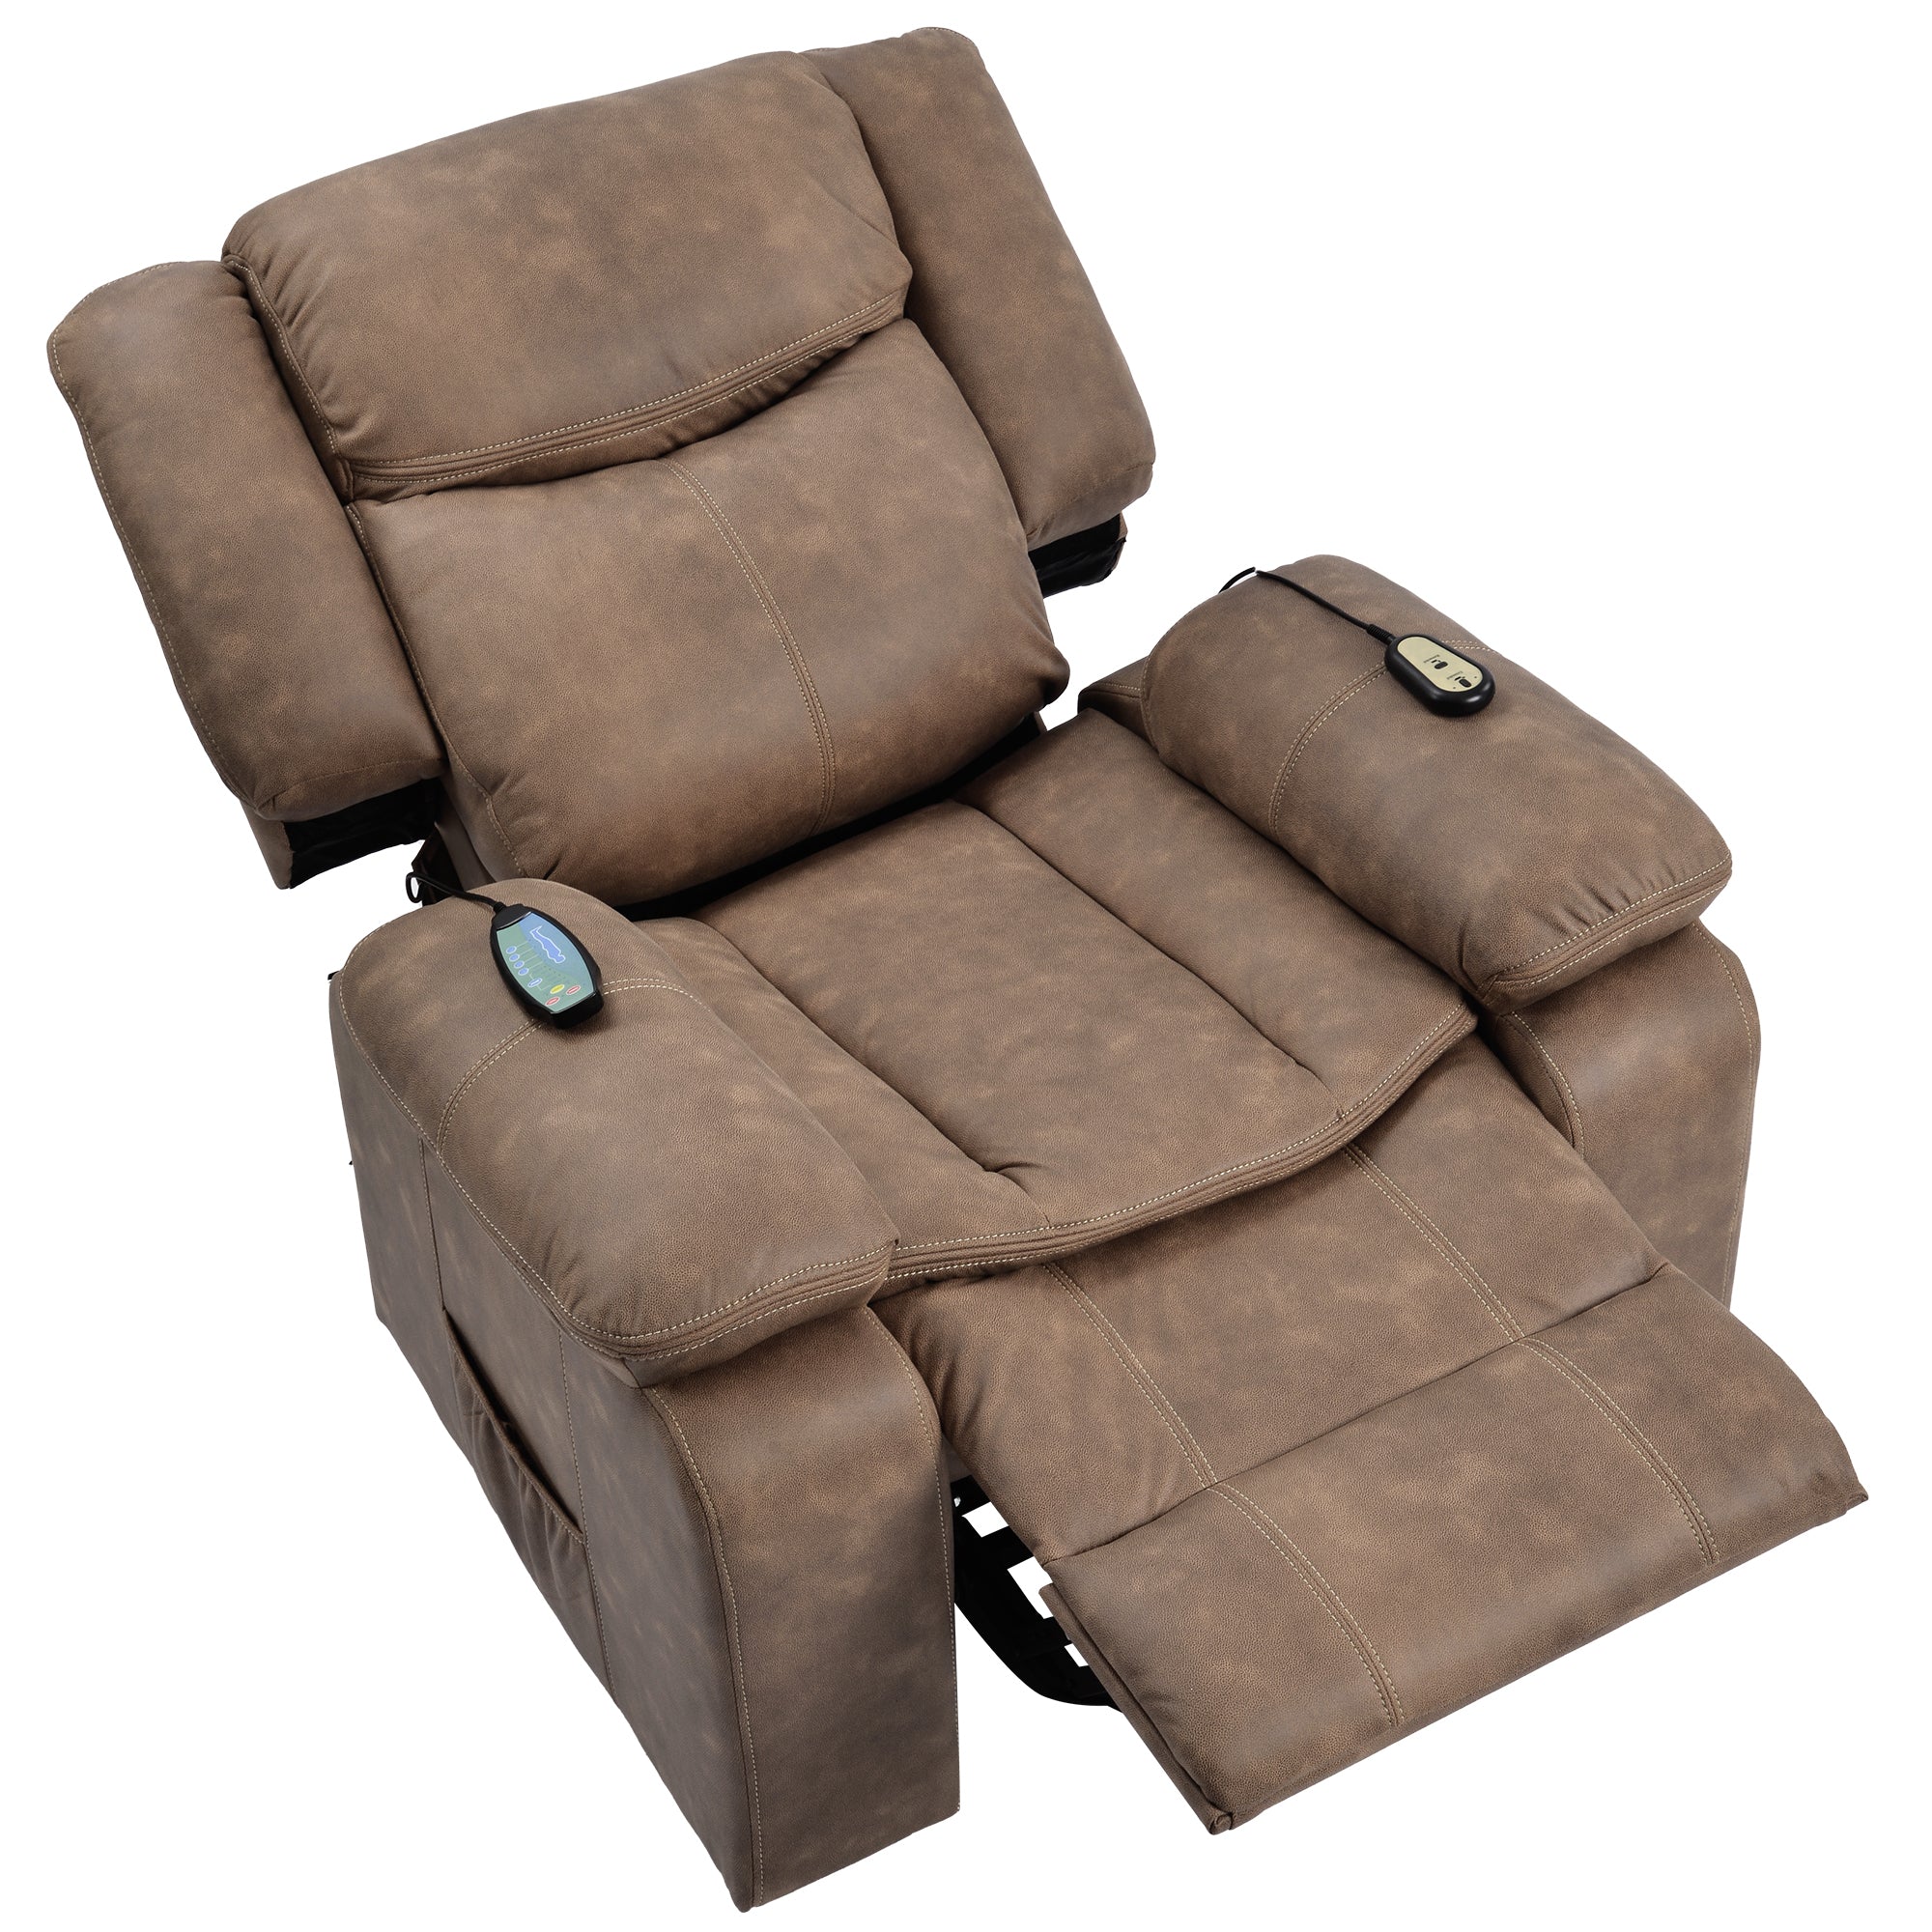 Brown Power Lift Chair Top Profile with headrest and footrest extended